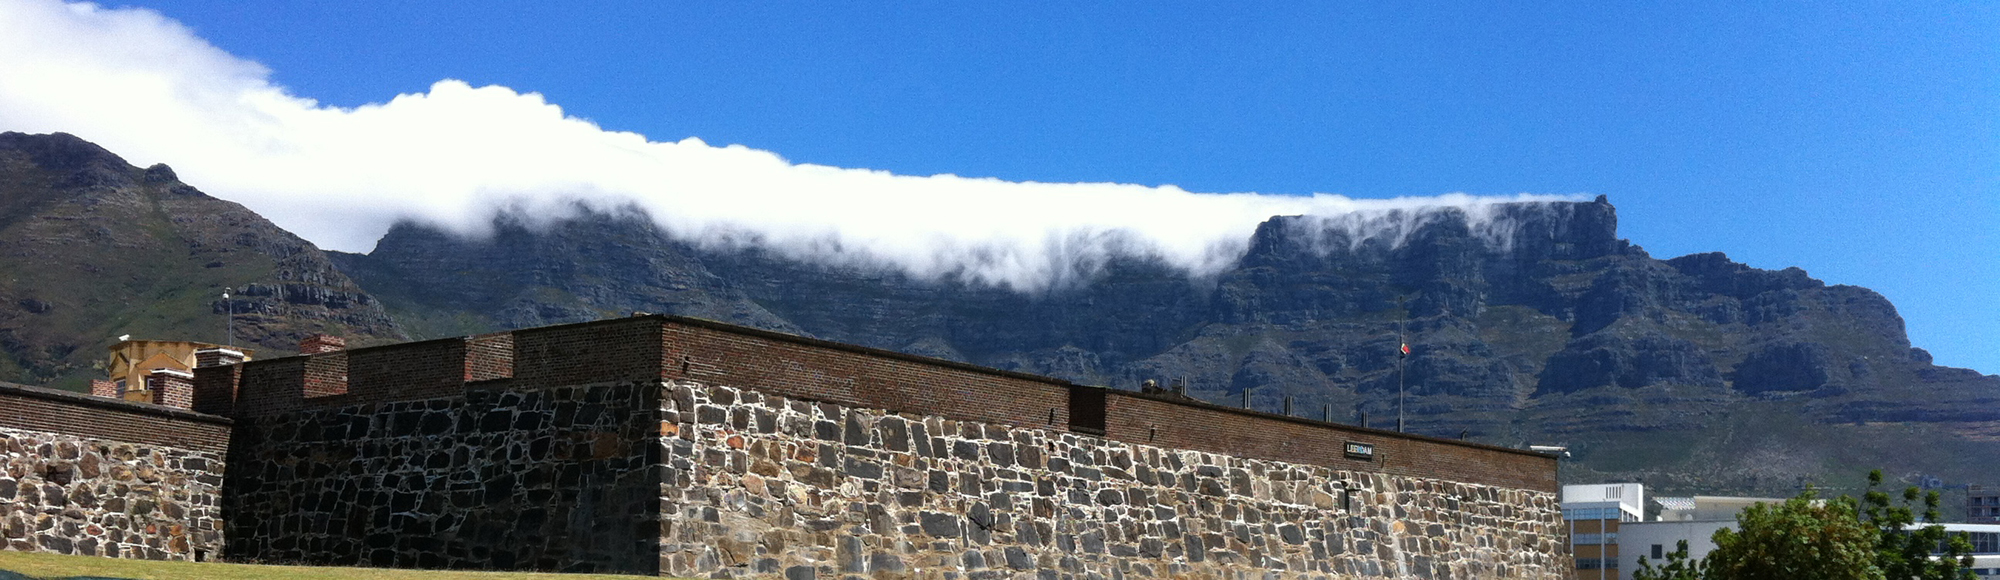 Table Mountain guided hikes